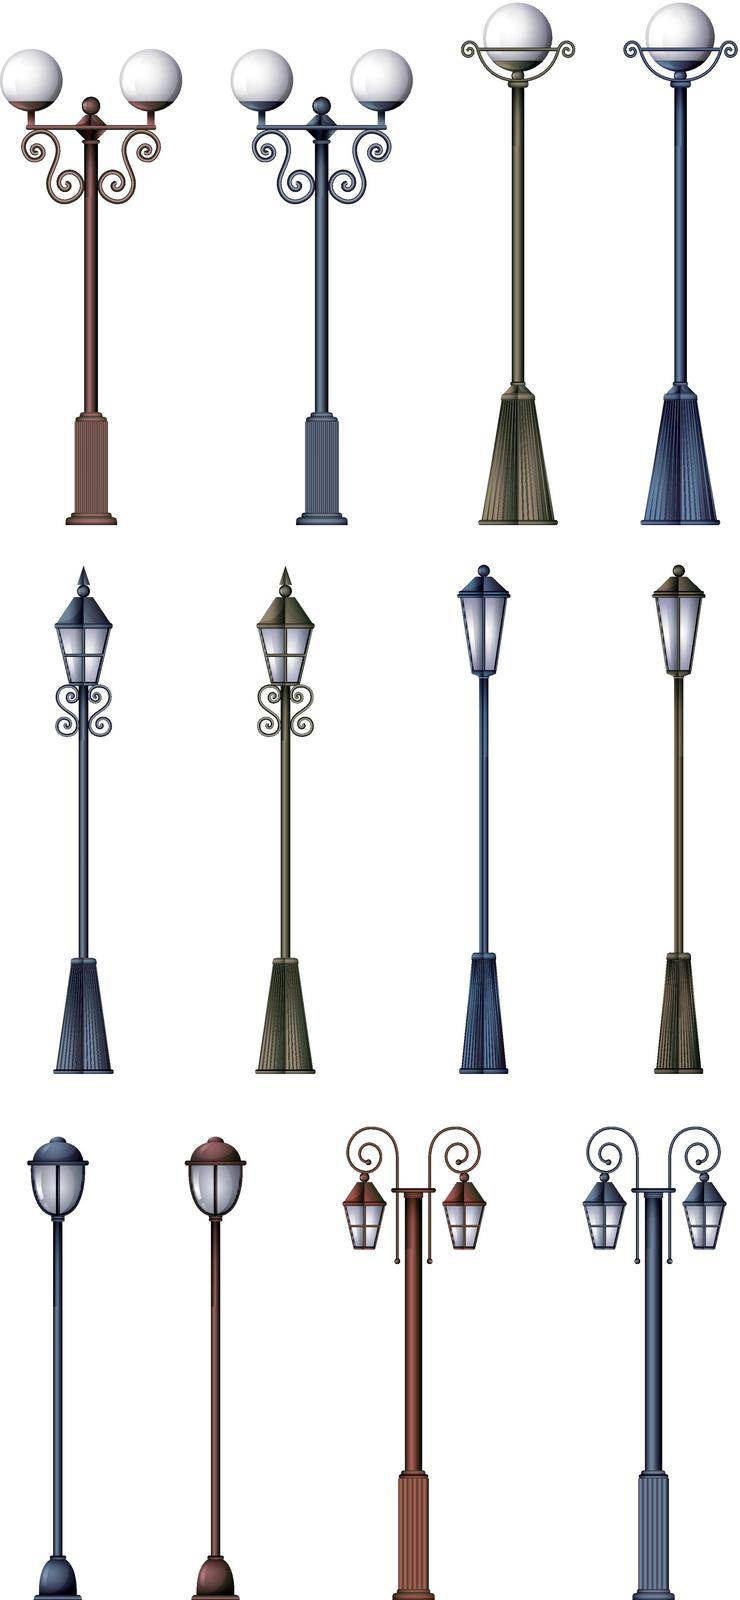 Different lamp designs on a white background